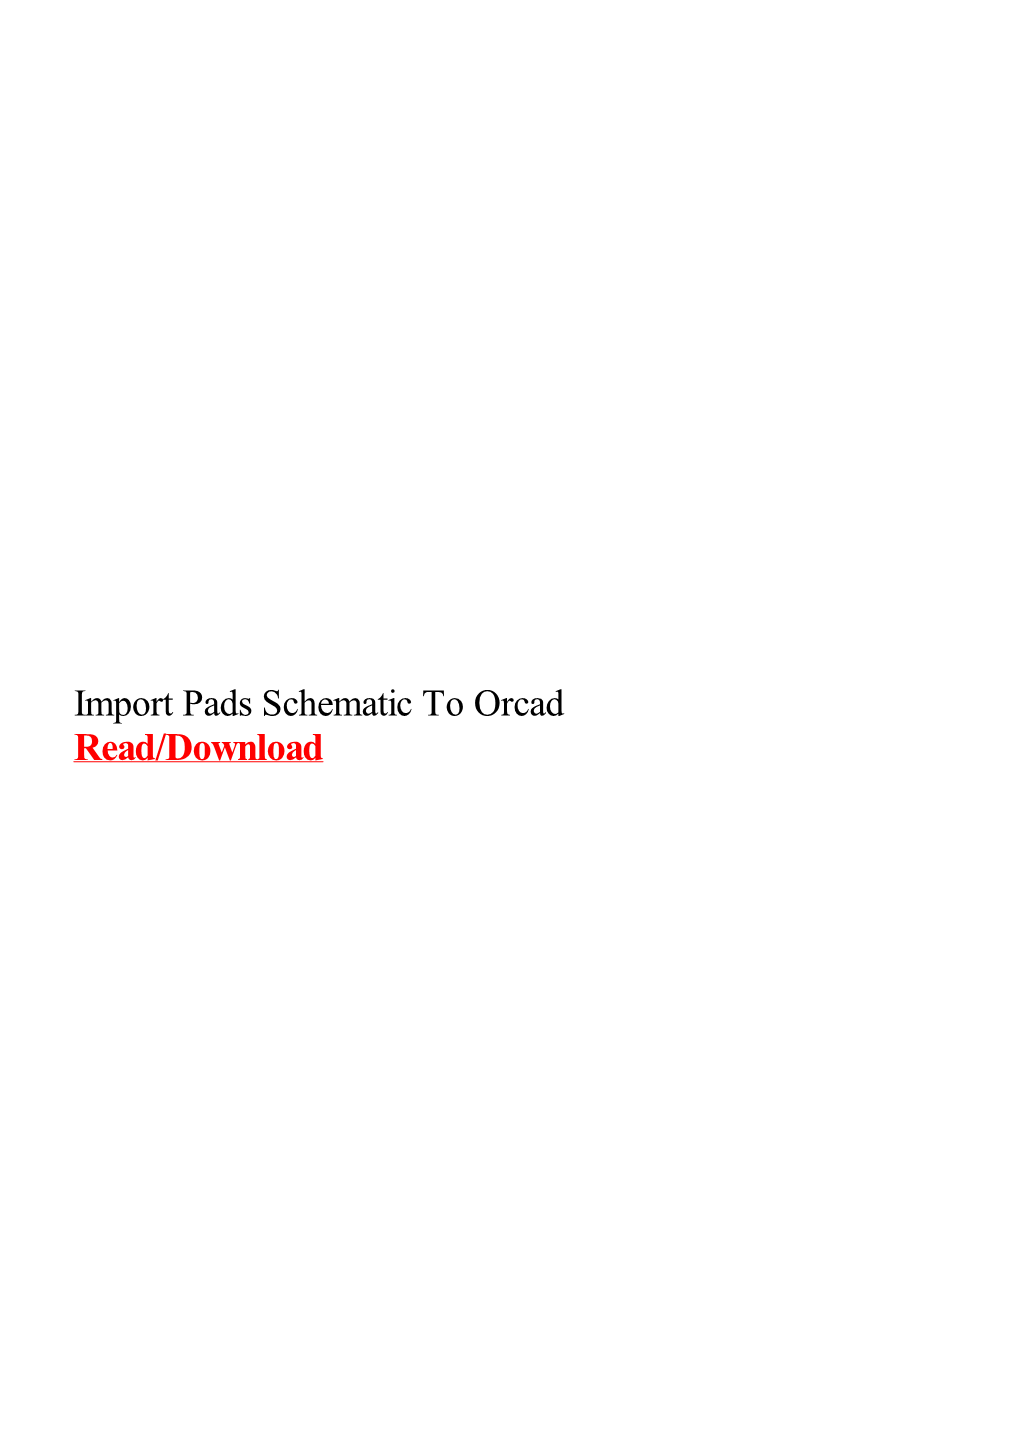 Import Pads Schematic to Orcad